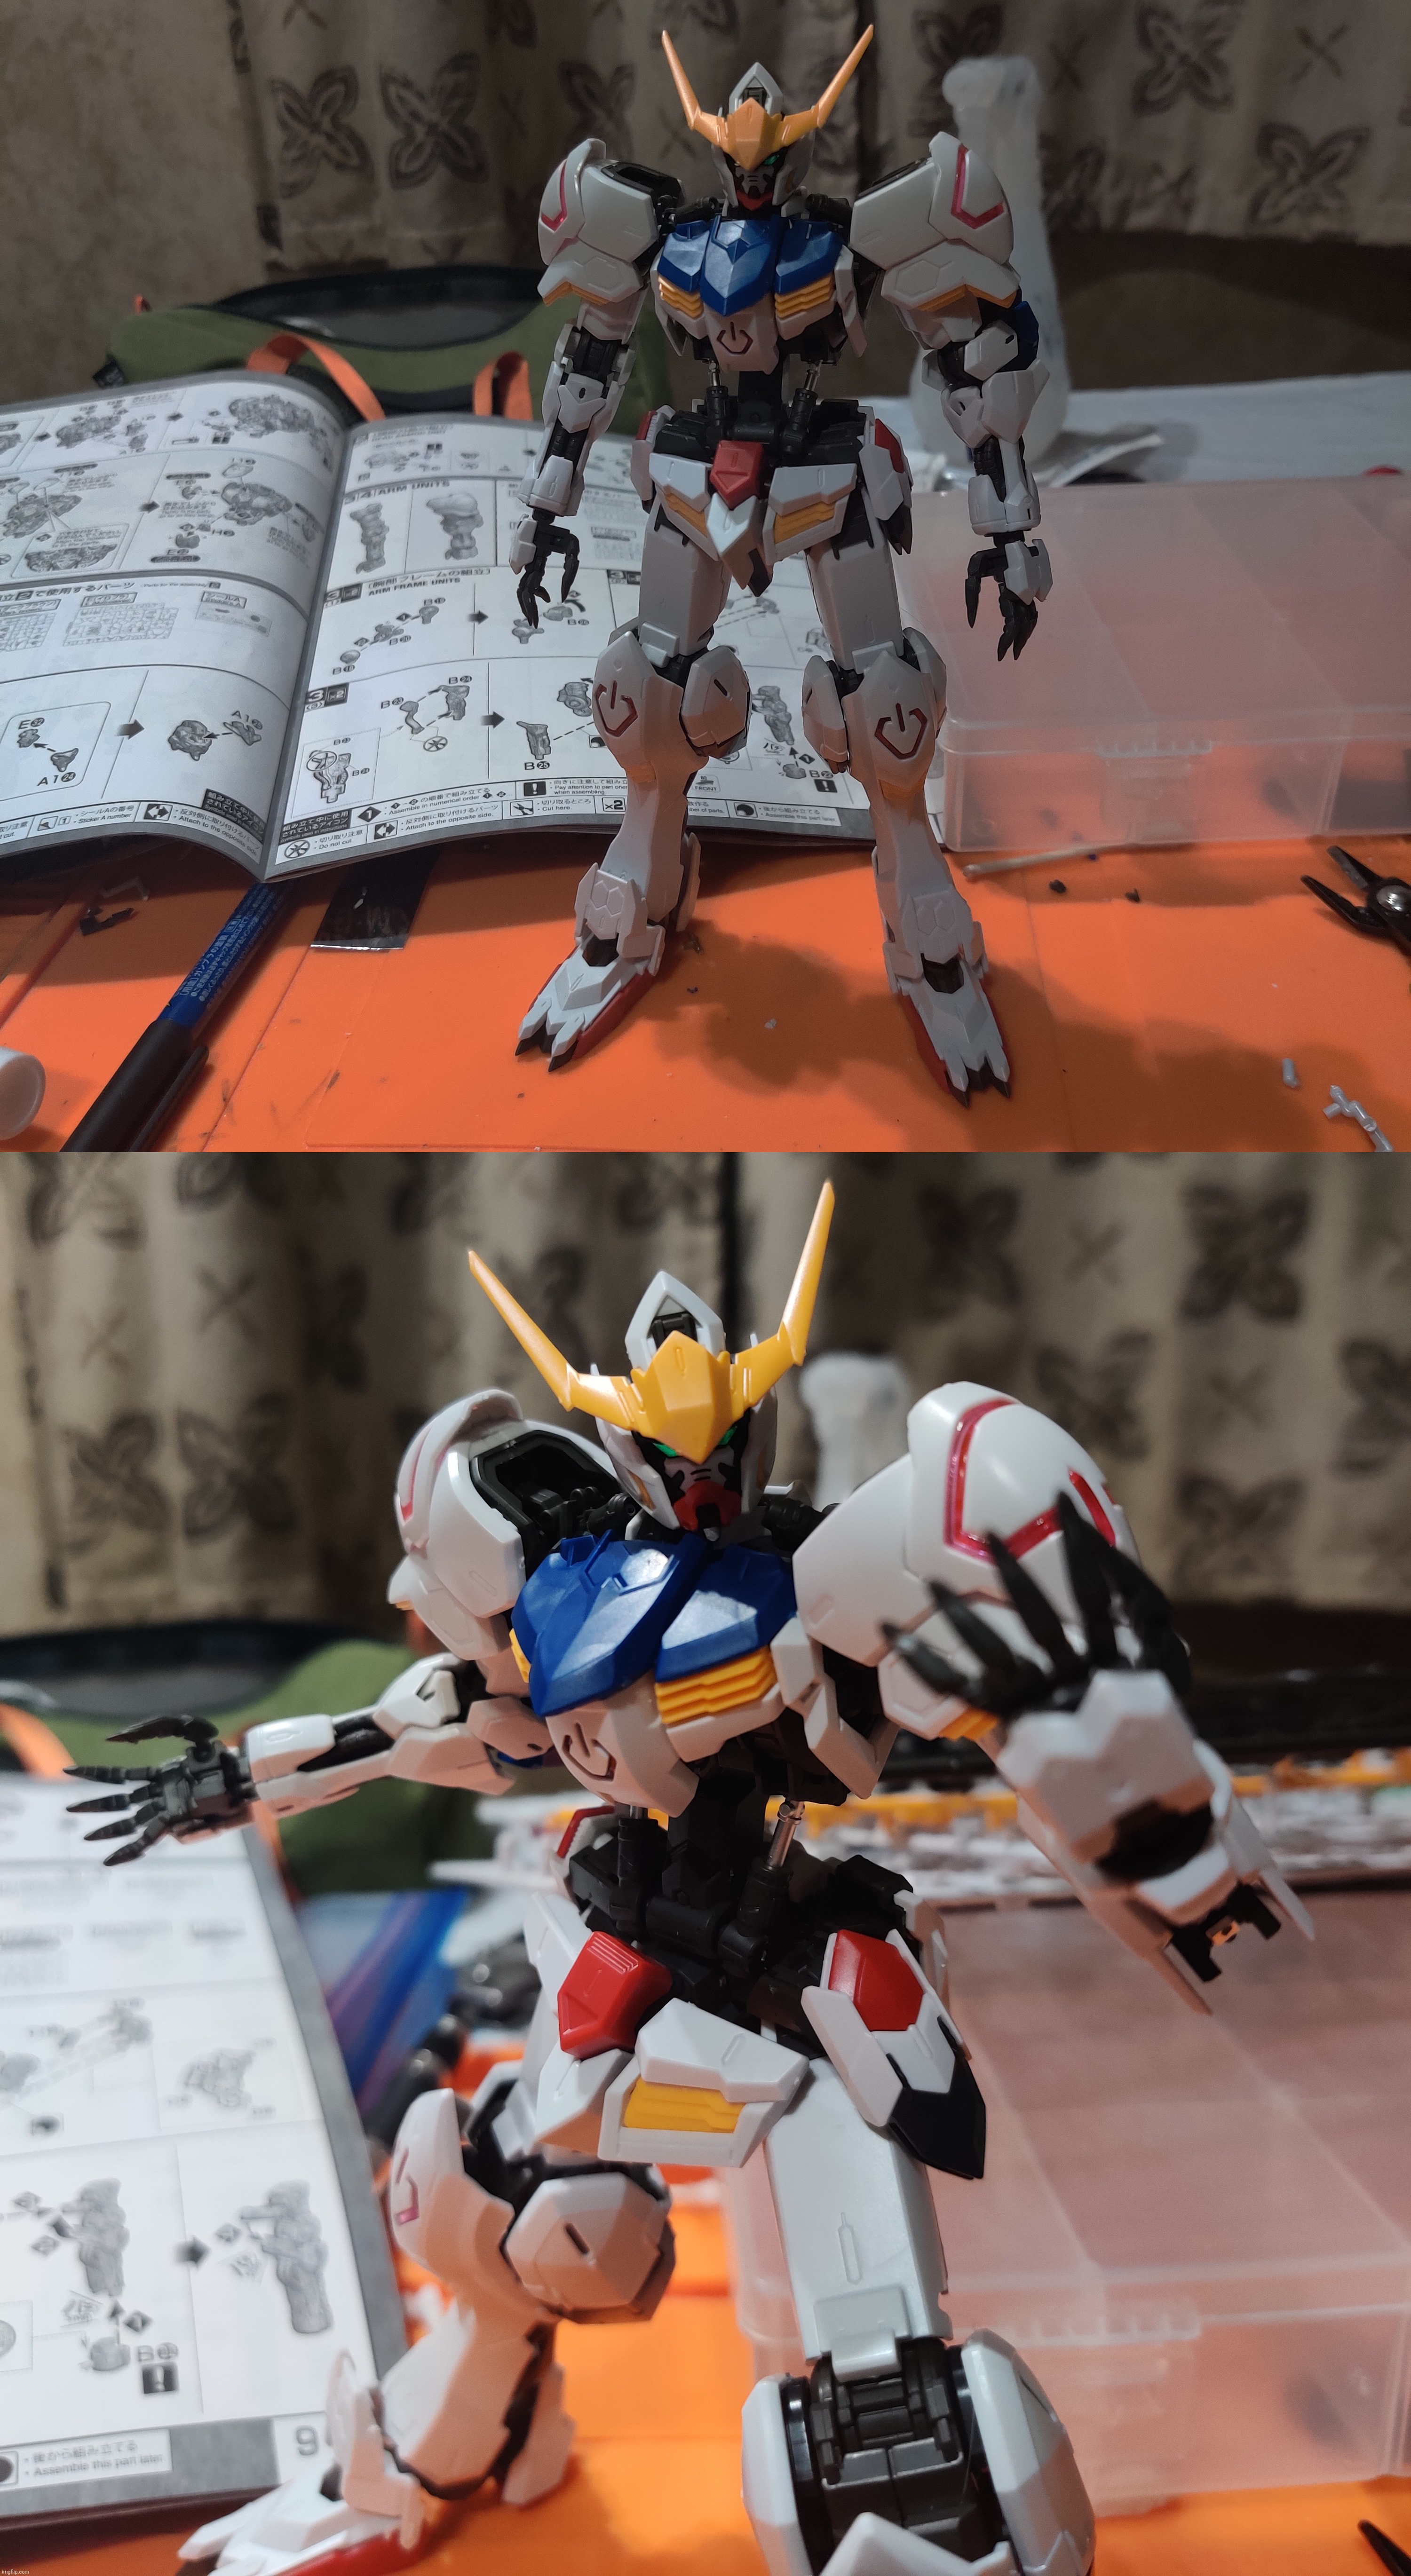 Armor's done. Can't do weapons or panel-lining tonight since it's late | made w/ Imgflip meme maker